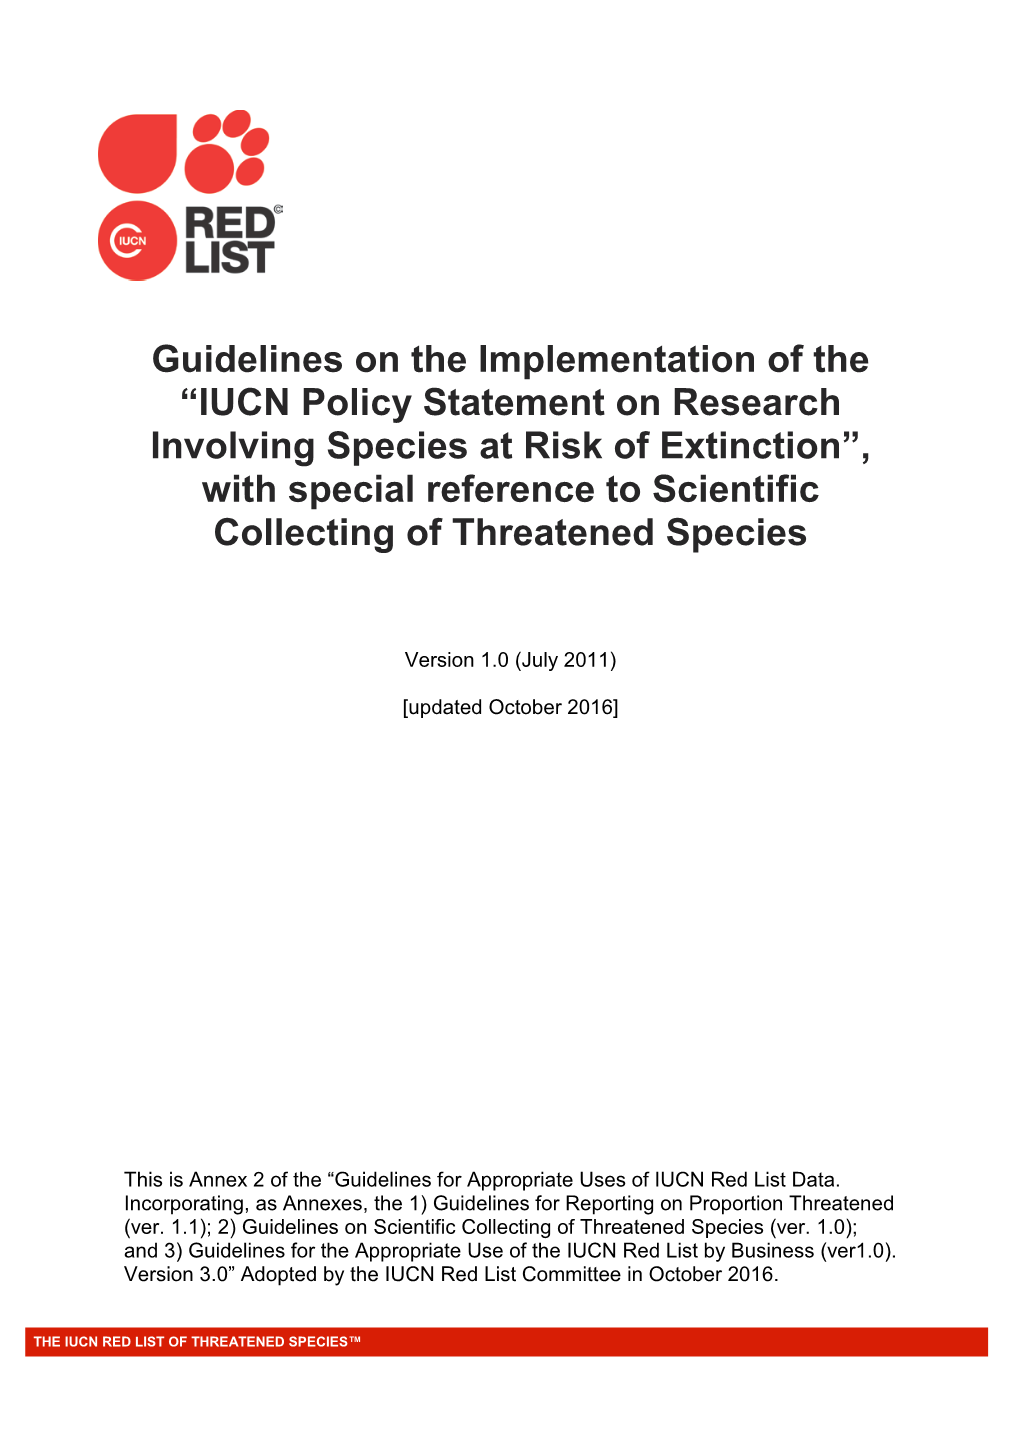 IUCN Policy Statement on Research Involving Species at Risk of Extinction”, with Special Reference to Scientific Collecting of Threatened Species